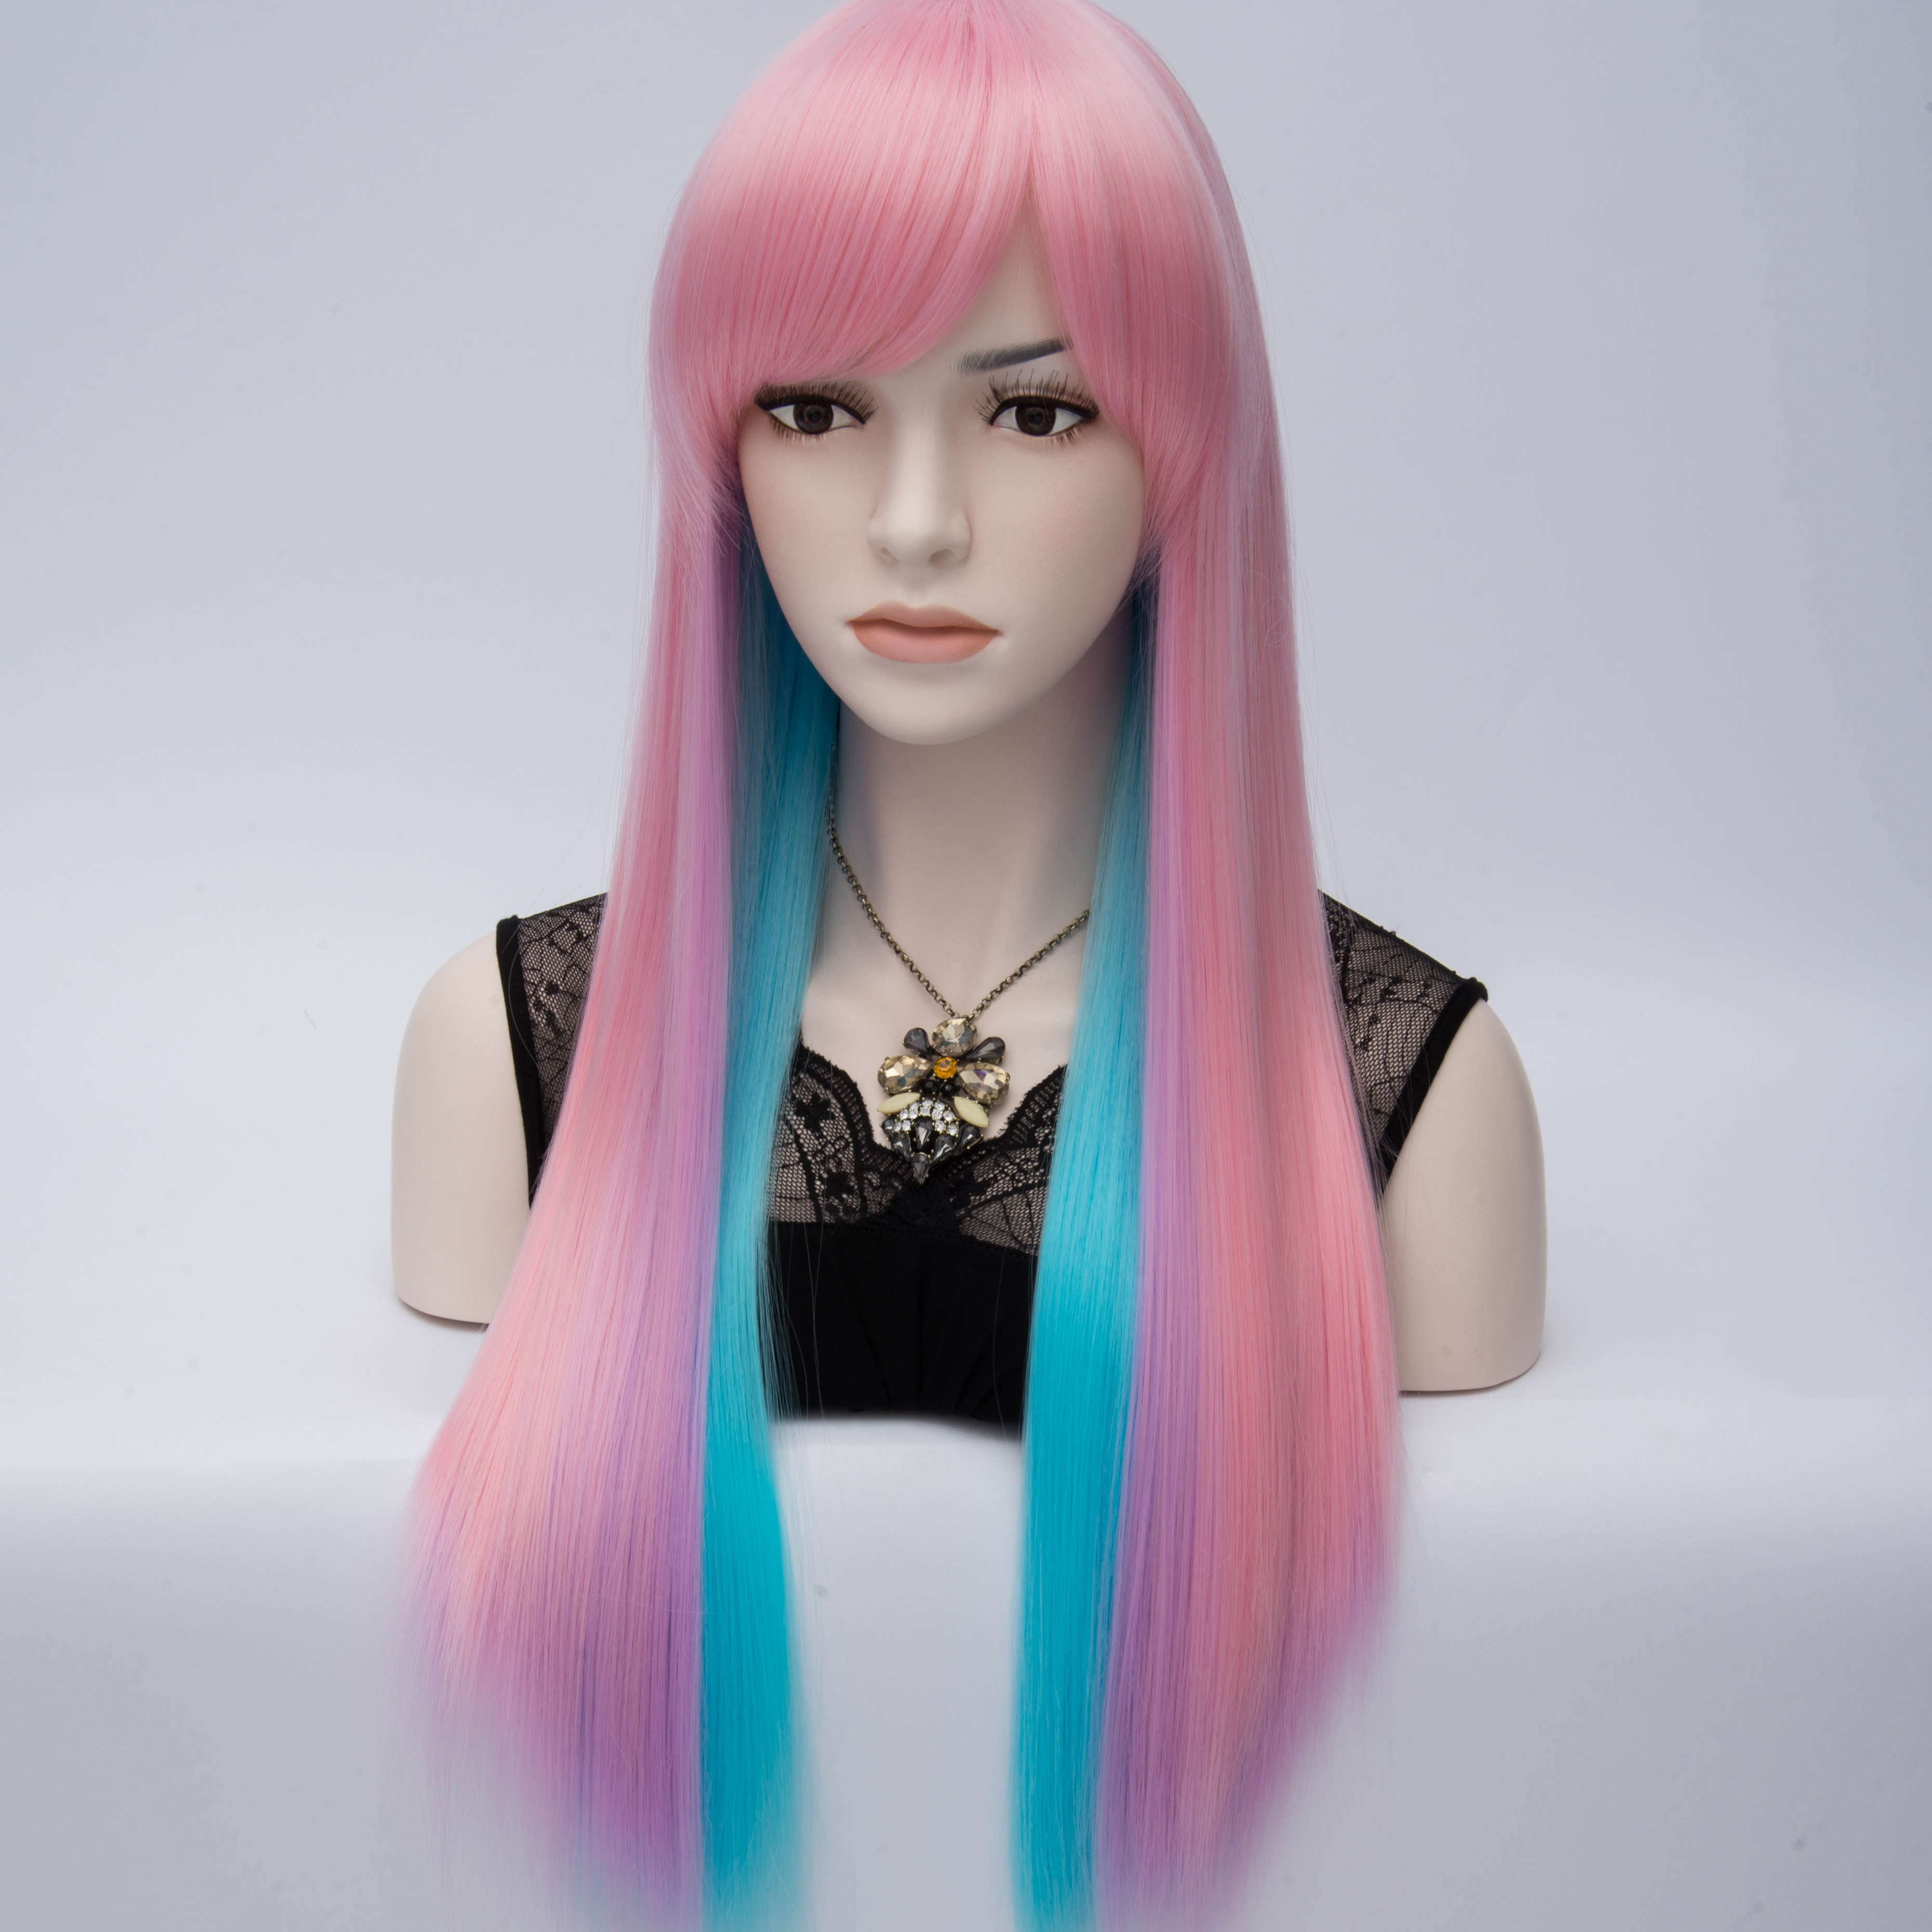 Club Party Rainbow Long Straight Women's Cosplay Wig 28 Inches